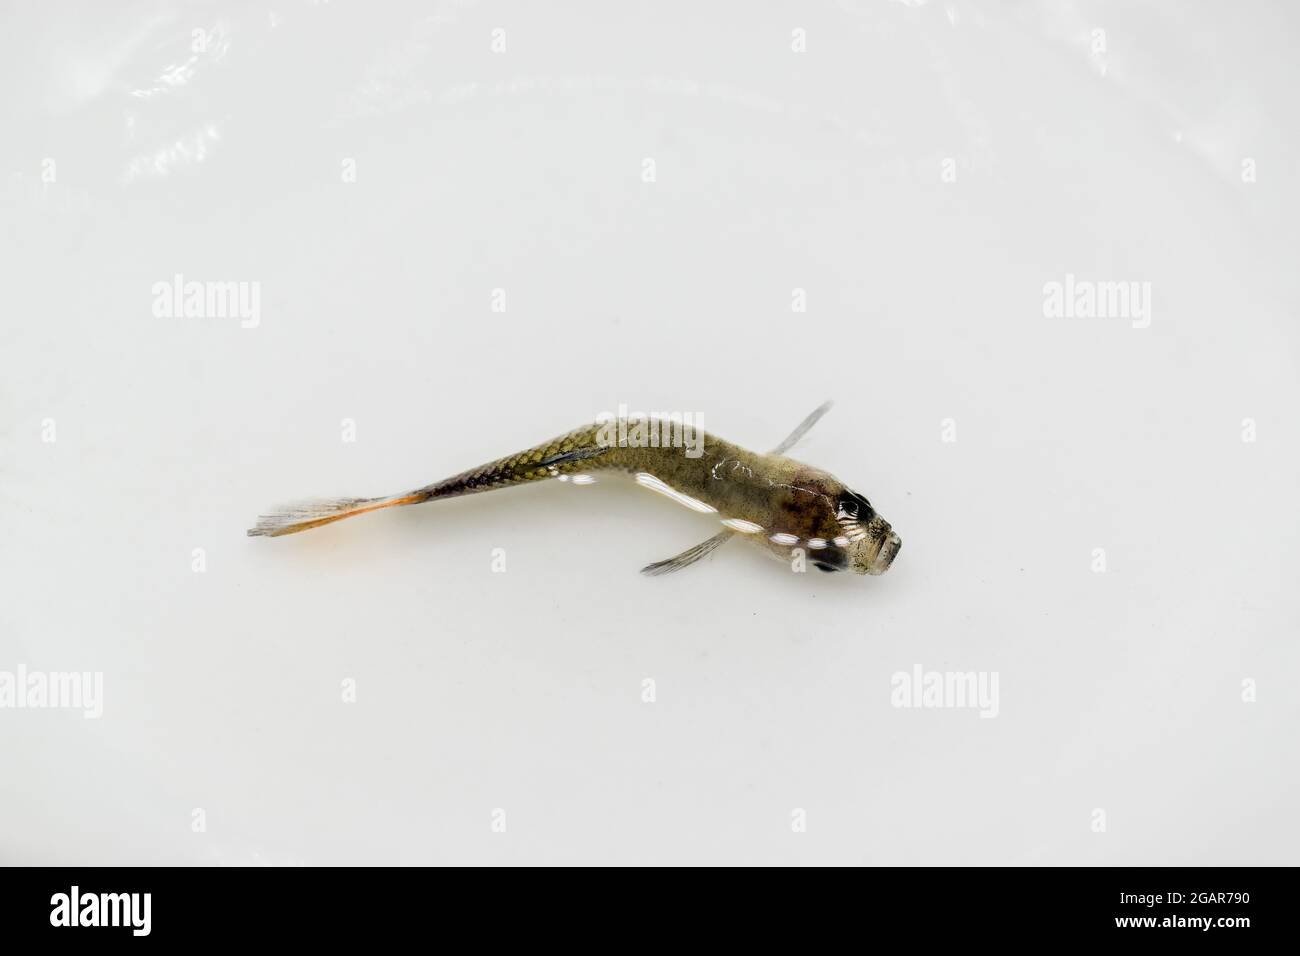 Guppy fish died due to tuberculosis disease. Dead Small fish on the surface of water. Stock Photo